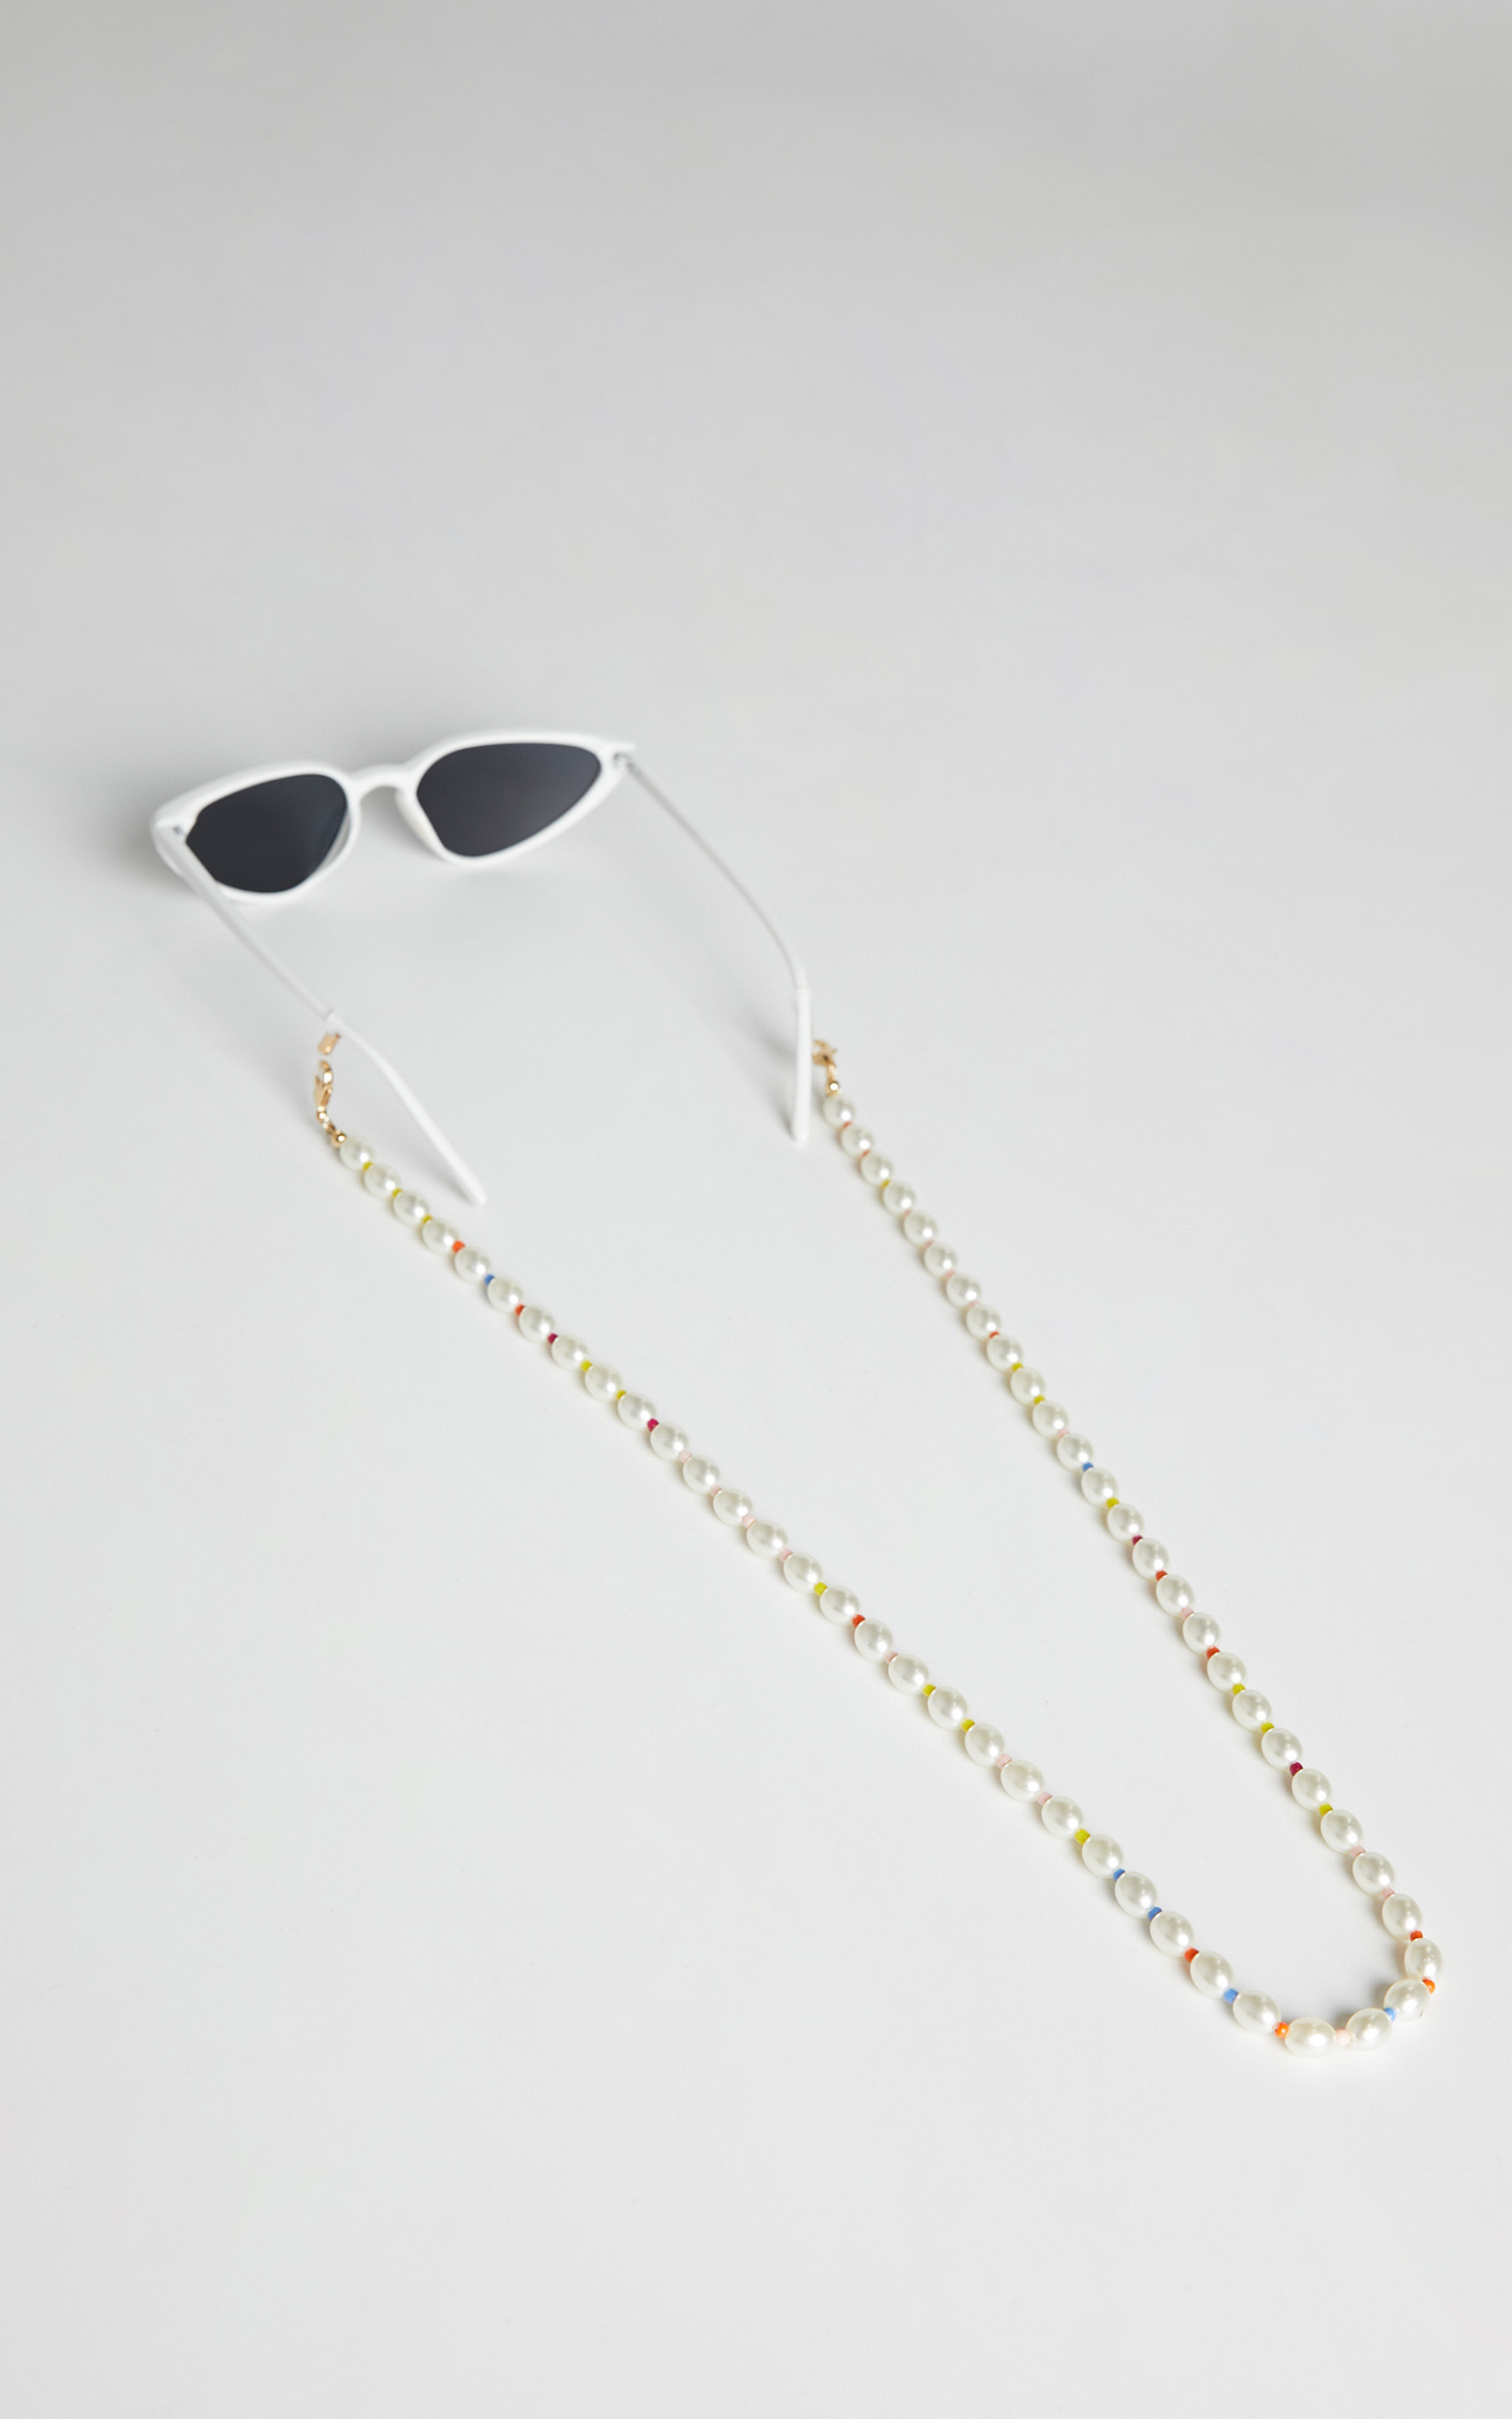 Crystaline Sunglasses Chain in Pearl/Multi - NoSize, PRL1, hi-res image number null